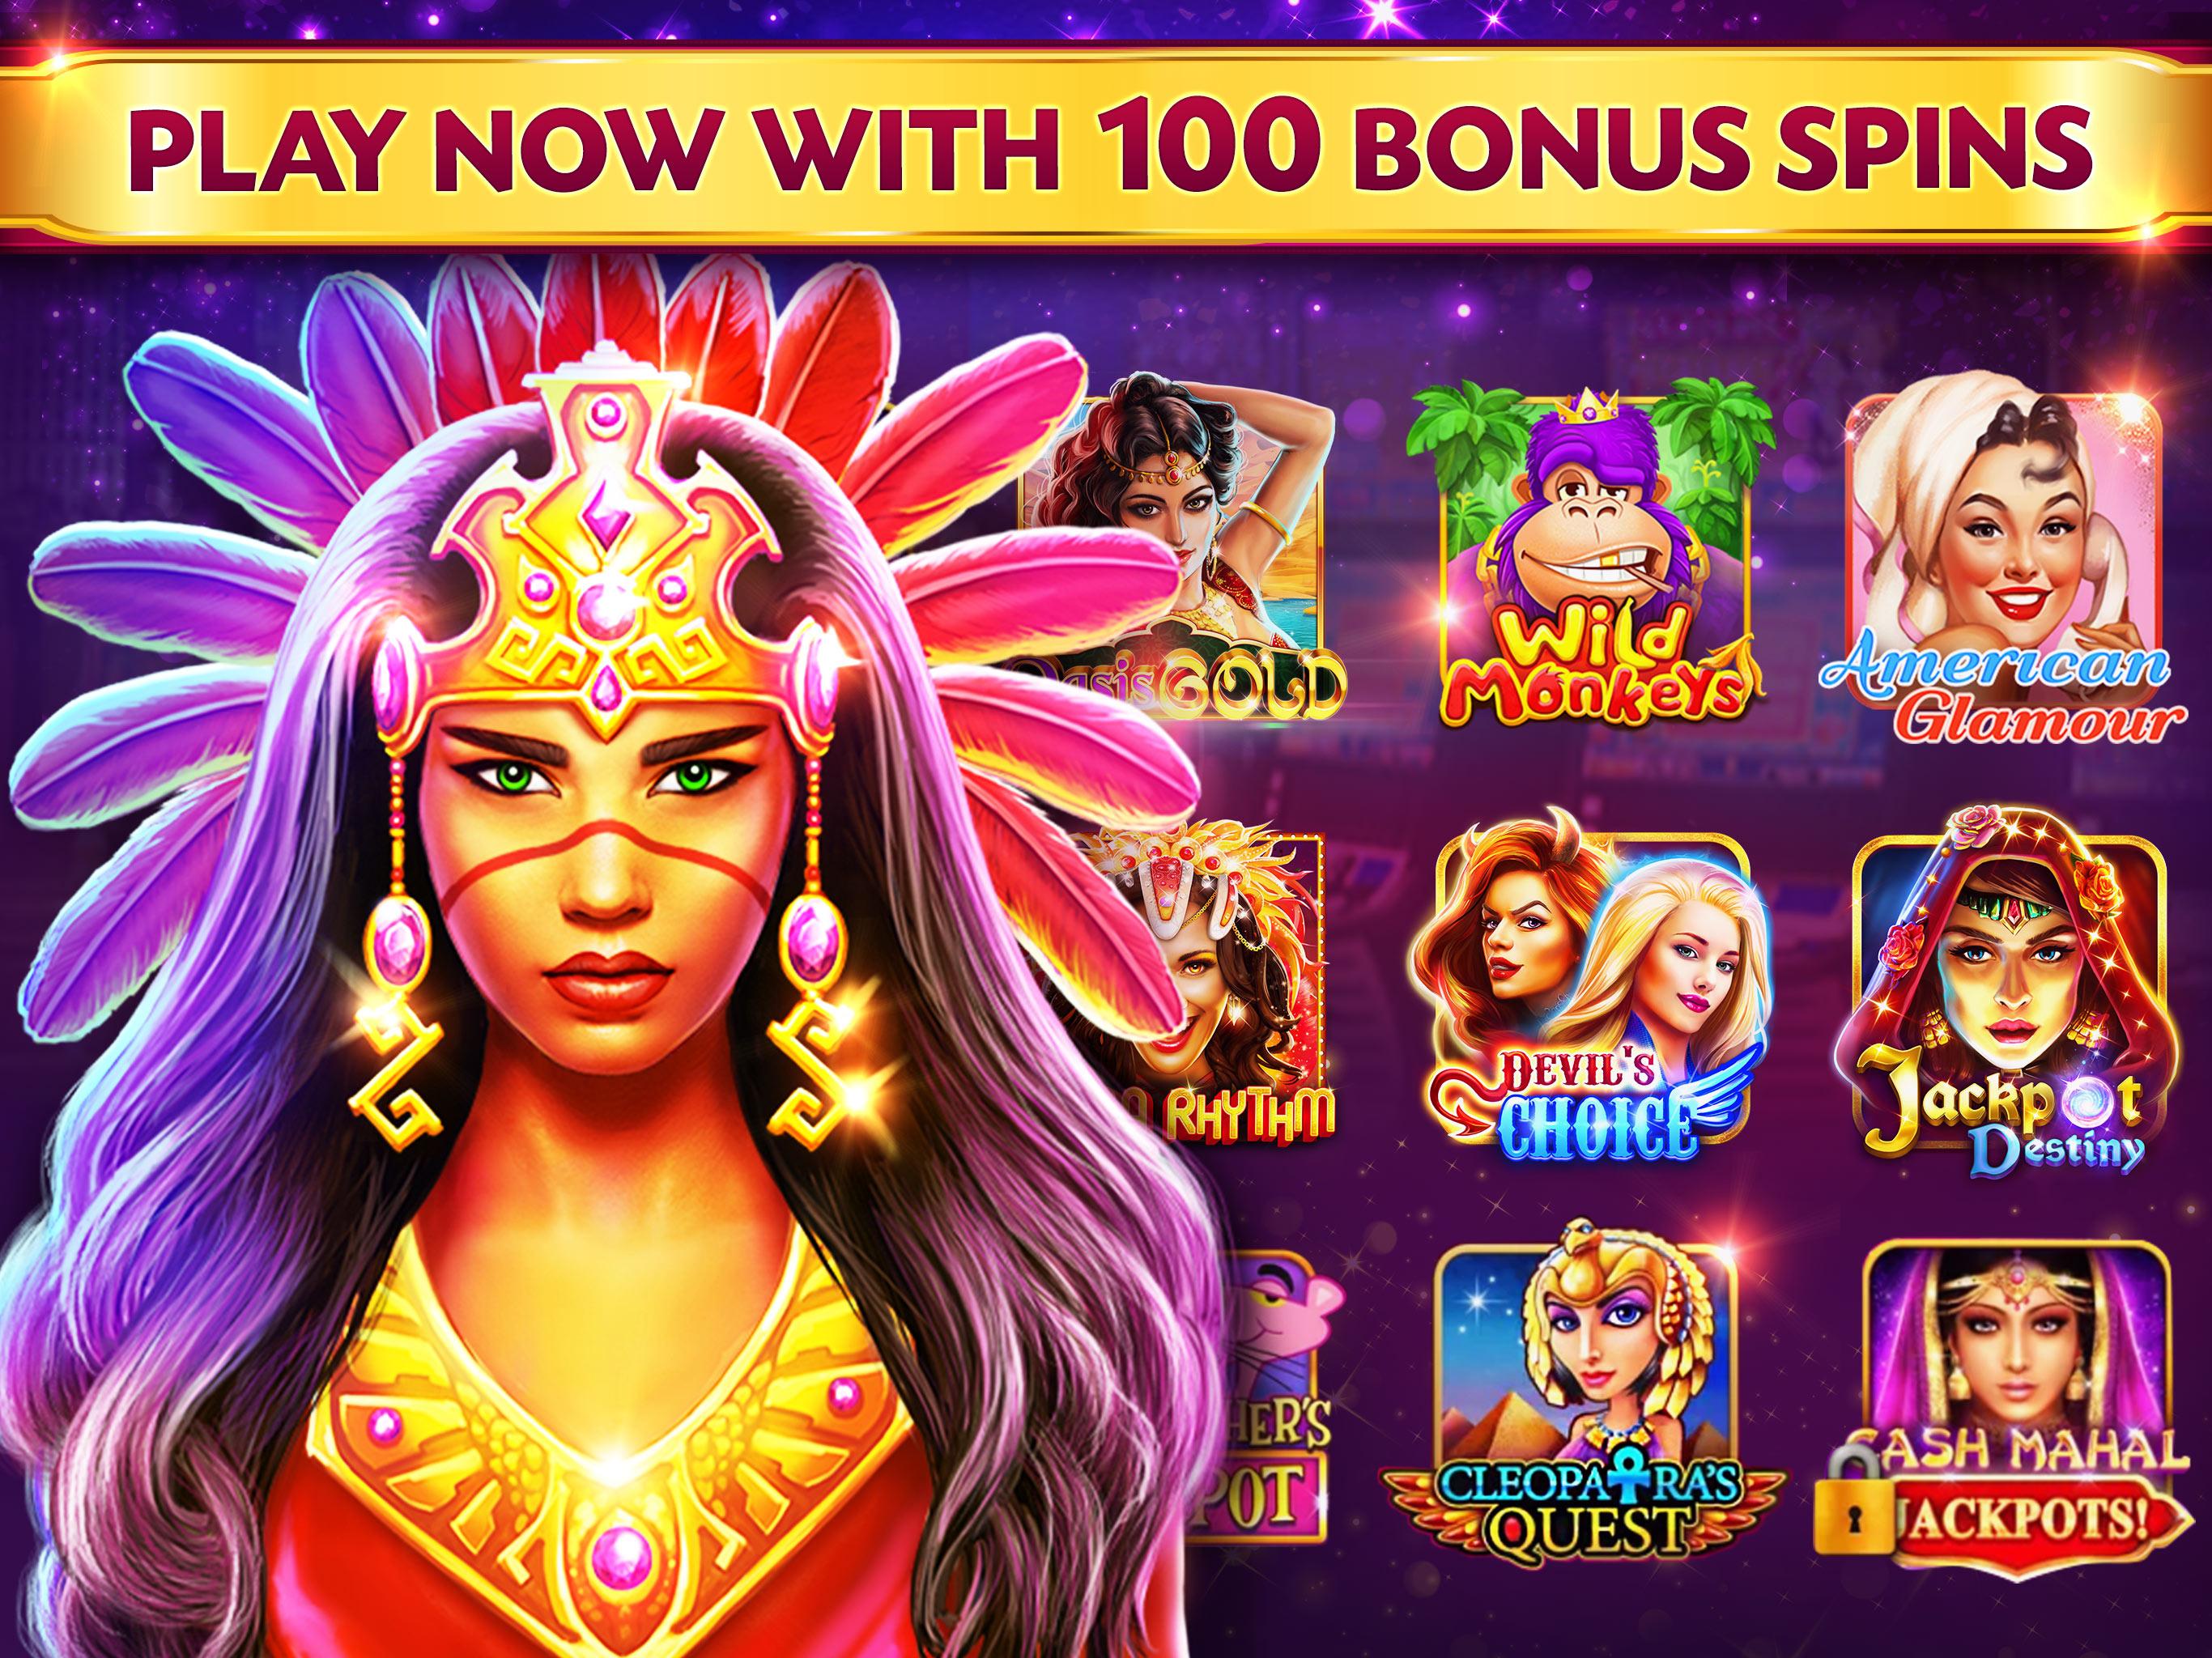 Download Free Slots Games For Pc